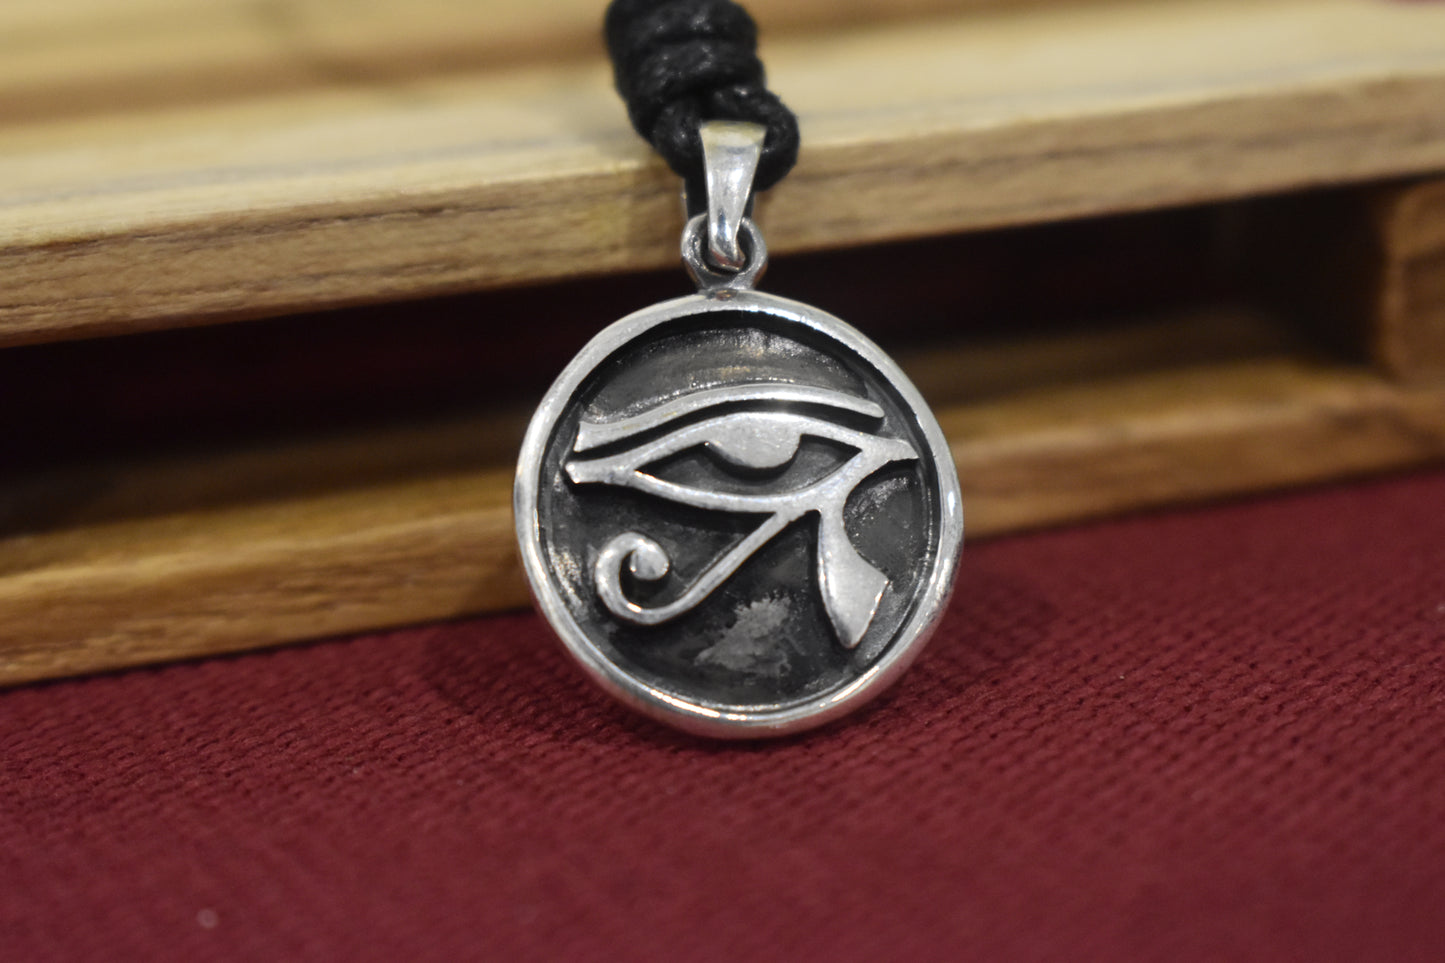 Eye of Ra - Ancient Egypt Handmade Silver Brass Pewter Necklace Pendant Jewelry